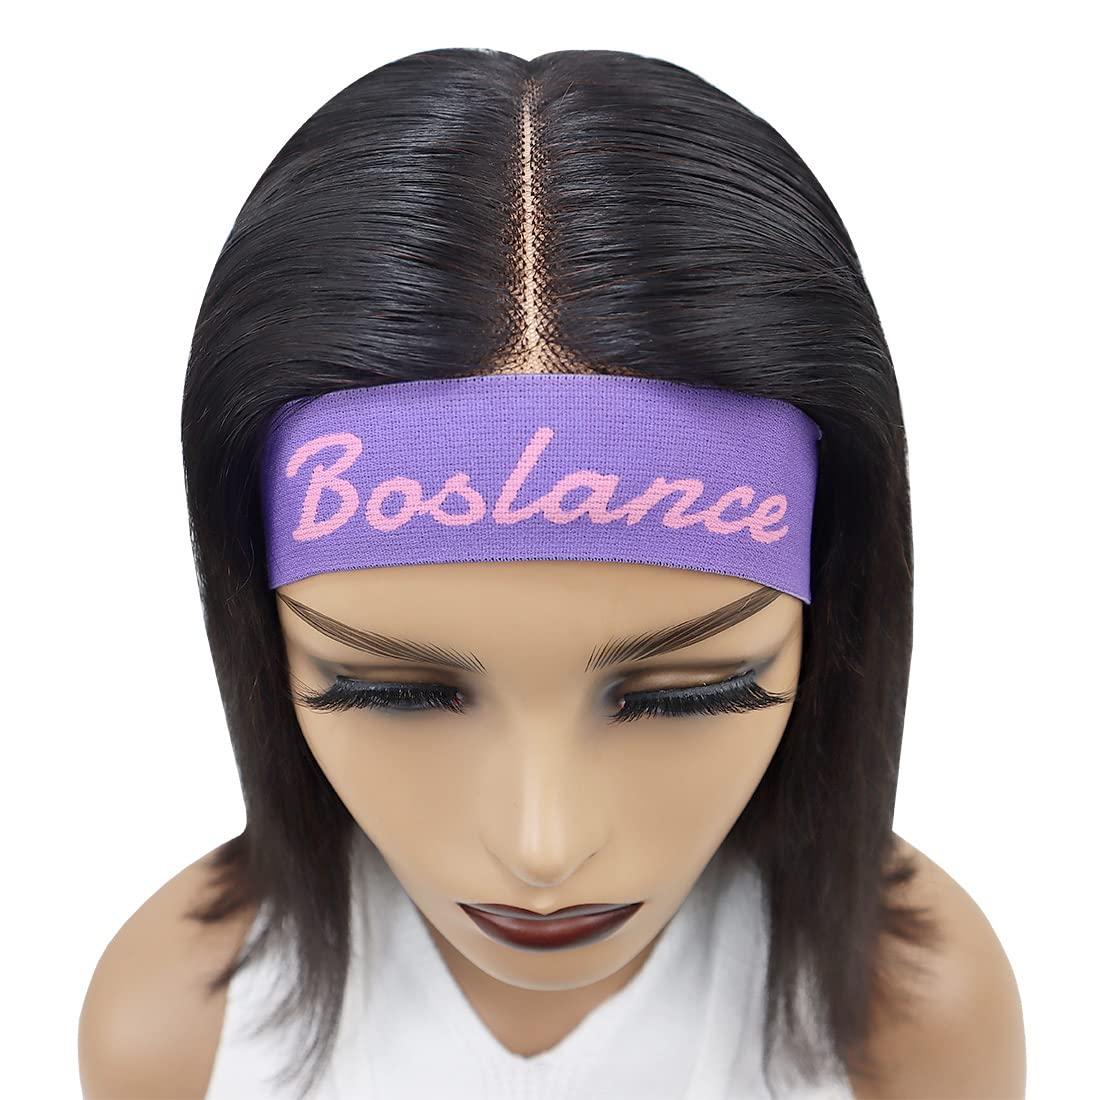 Elastic Lace Melt Band Lace Front Wig Accessories 